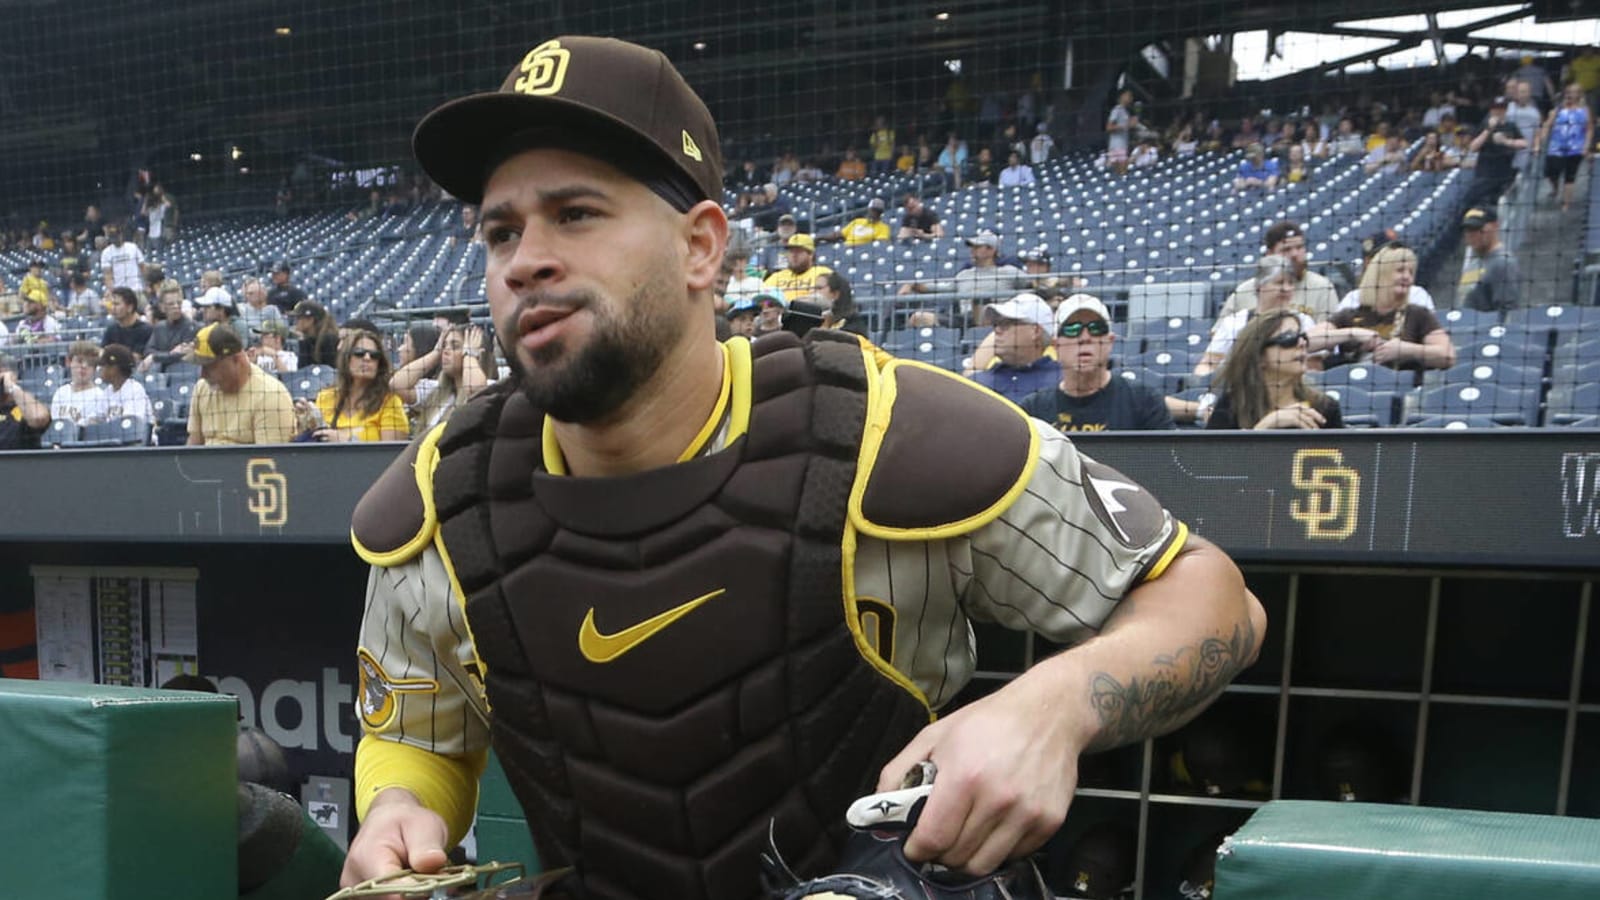 Pirates reportedly interested in top free-agent catcher